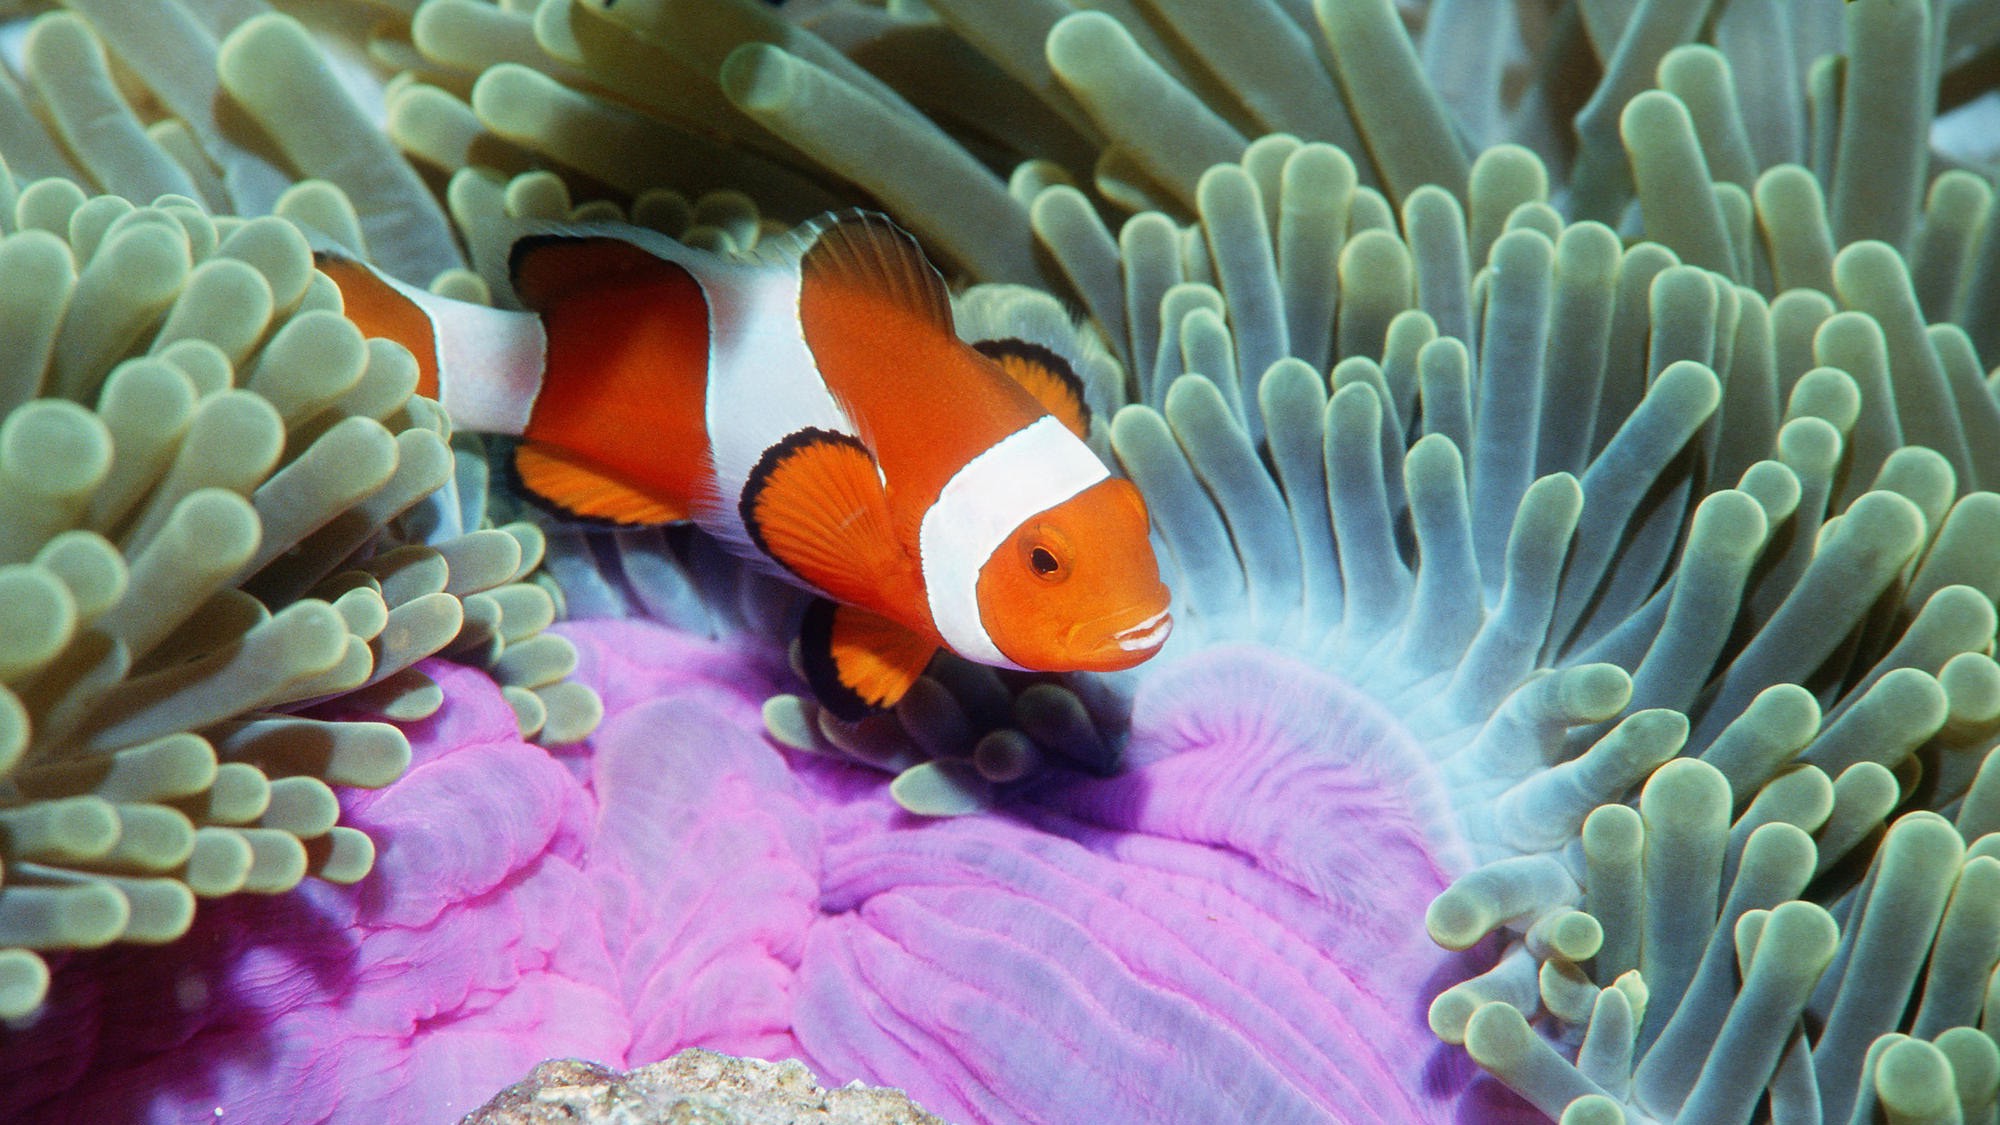 how to download clownfish